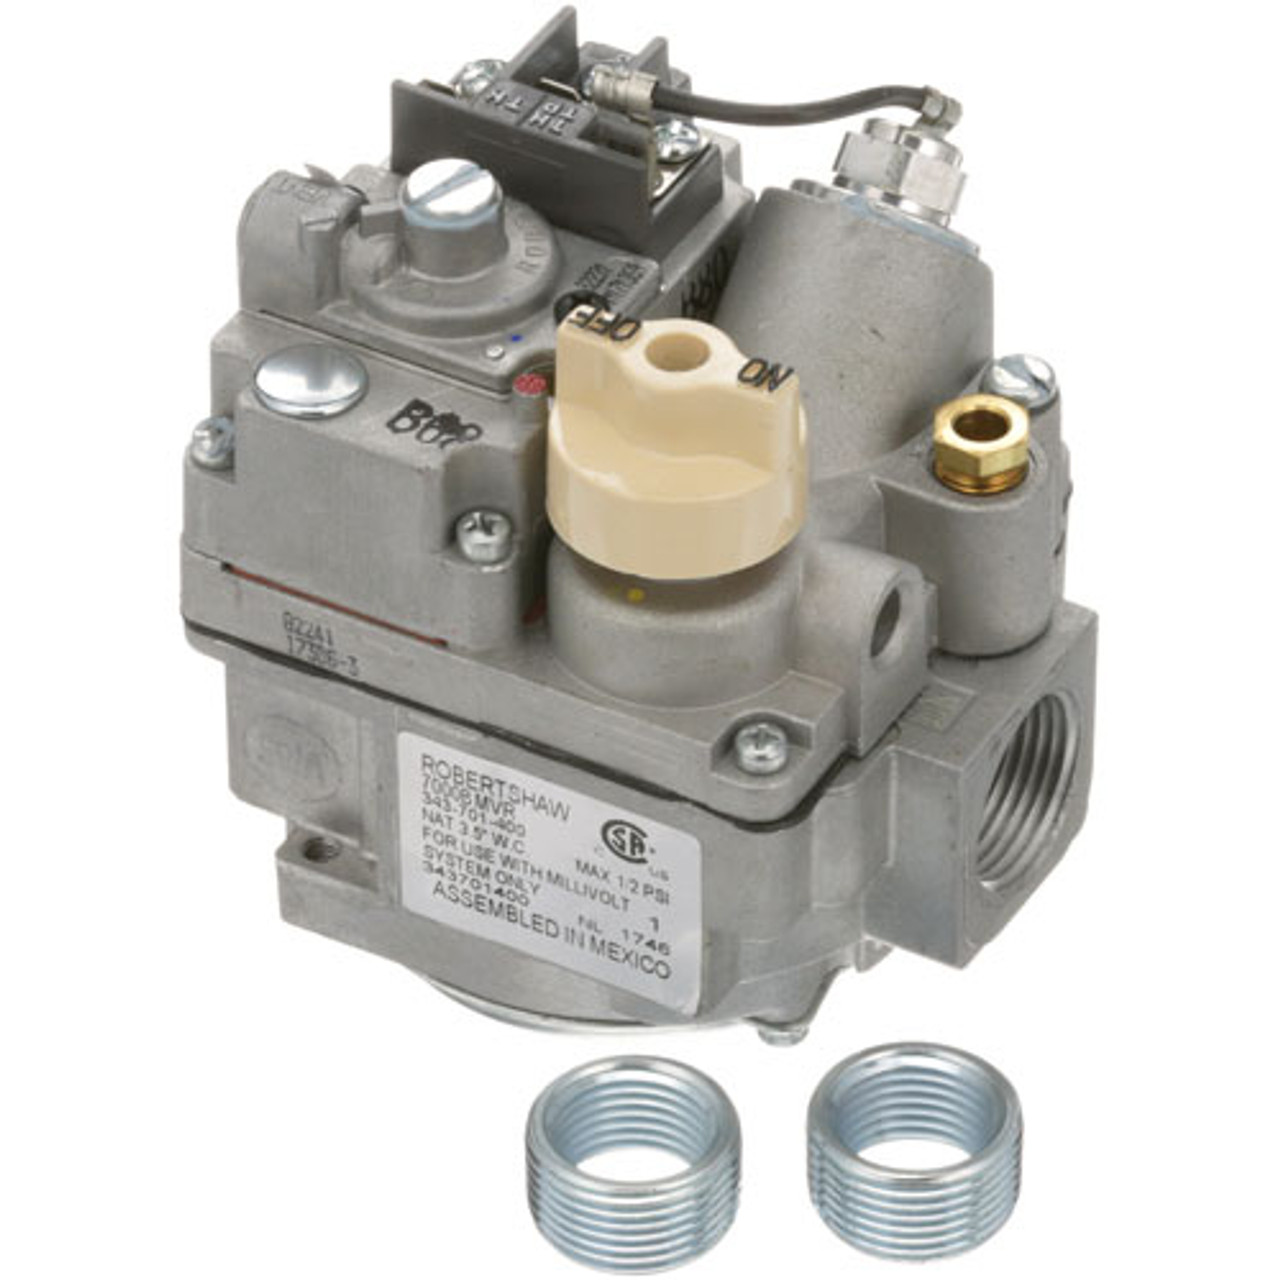 Gas Control - Replacement Part For Southbend 1055997